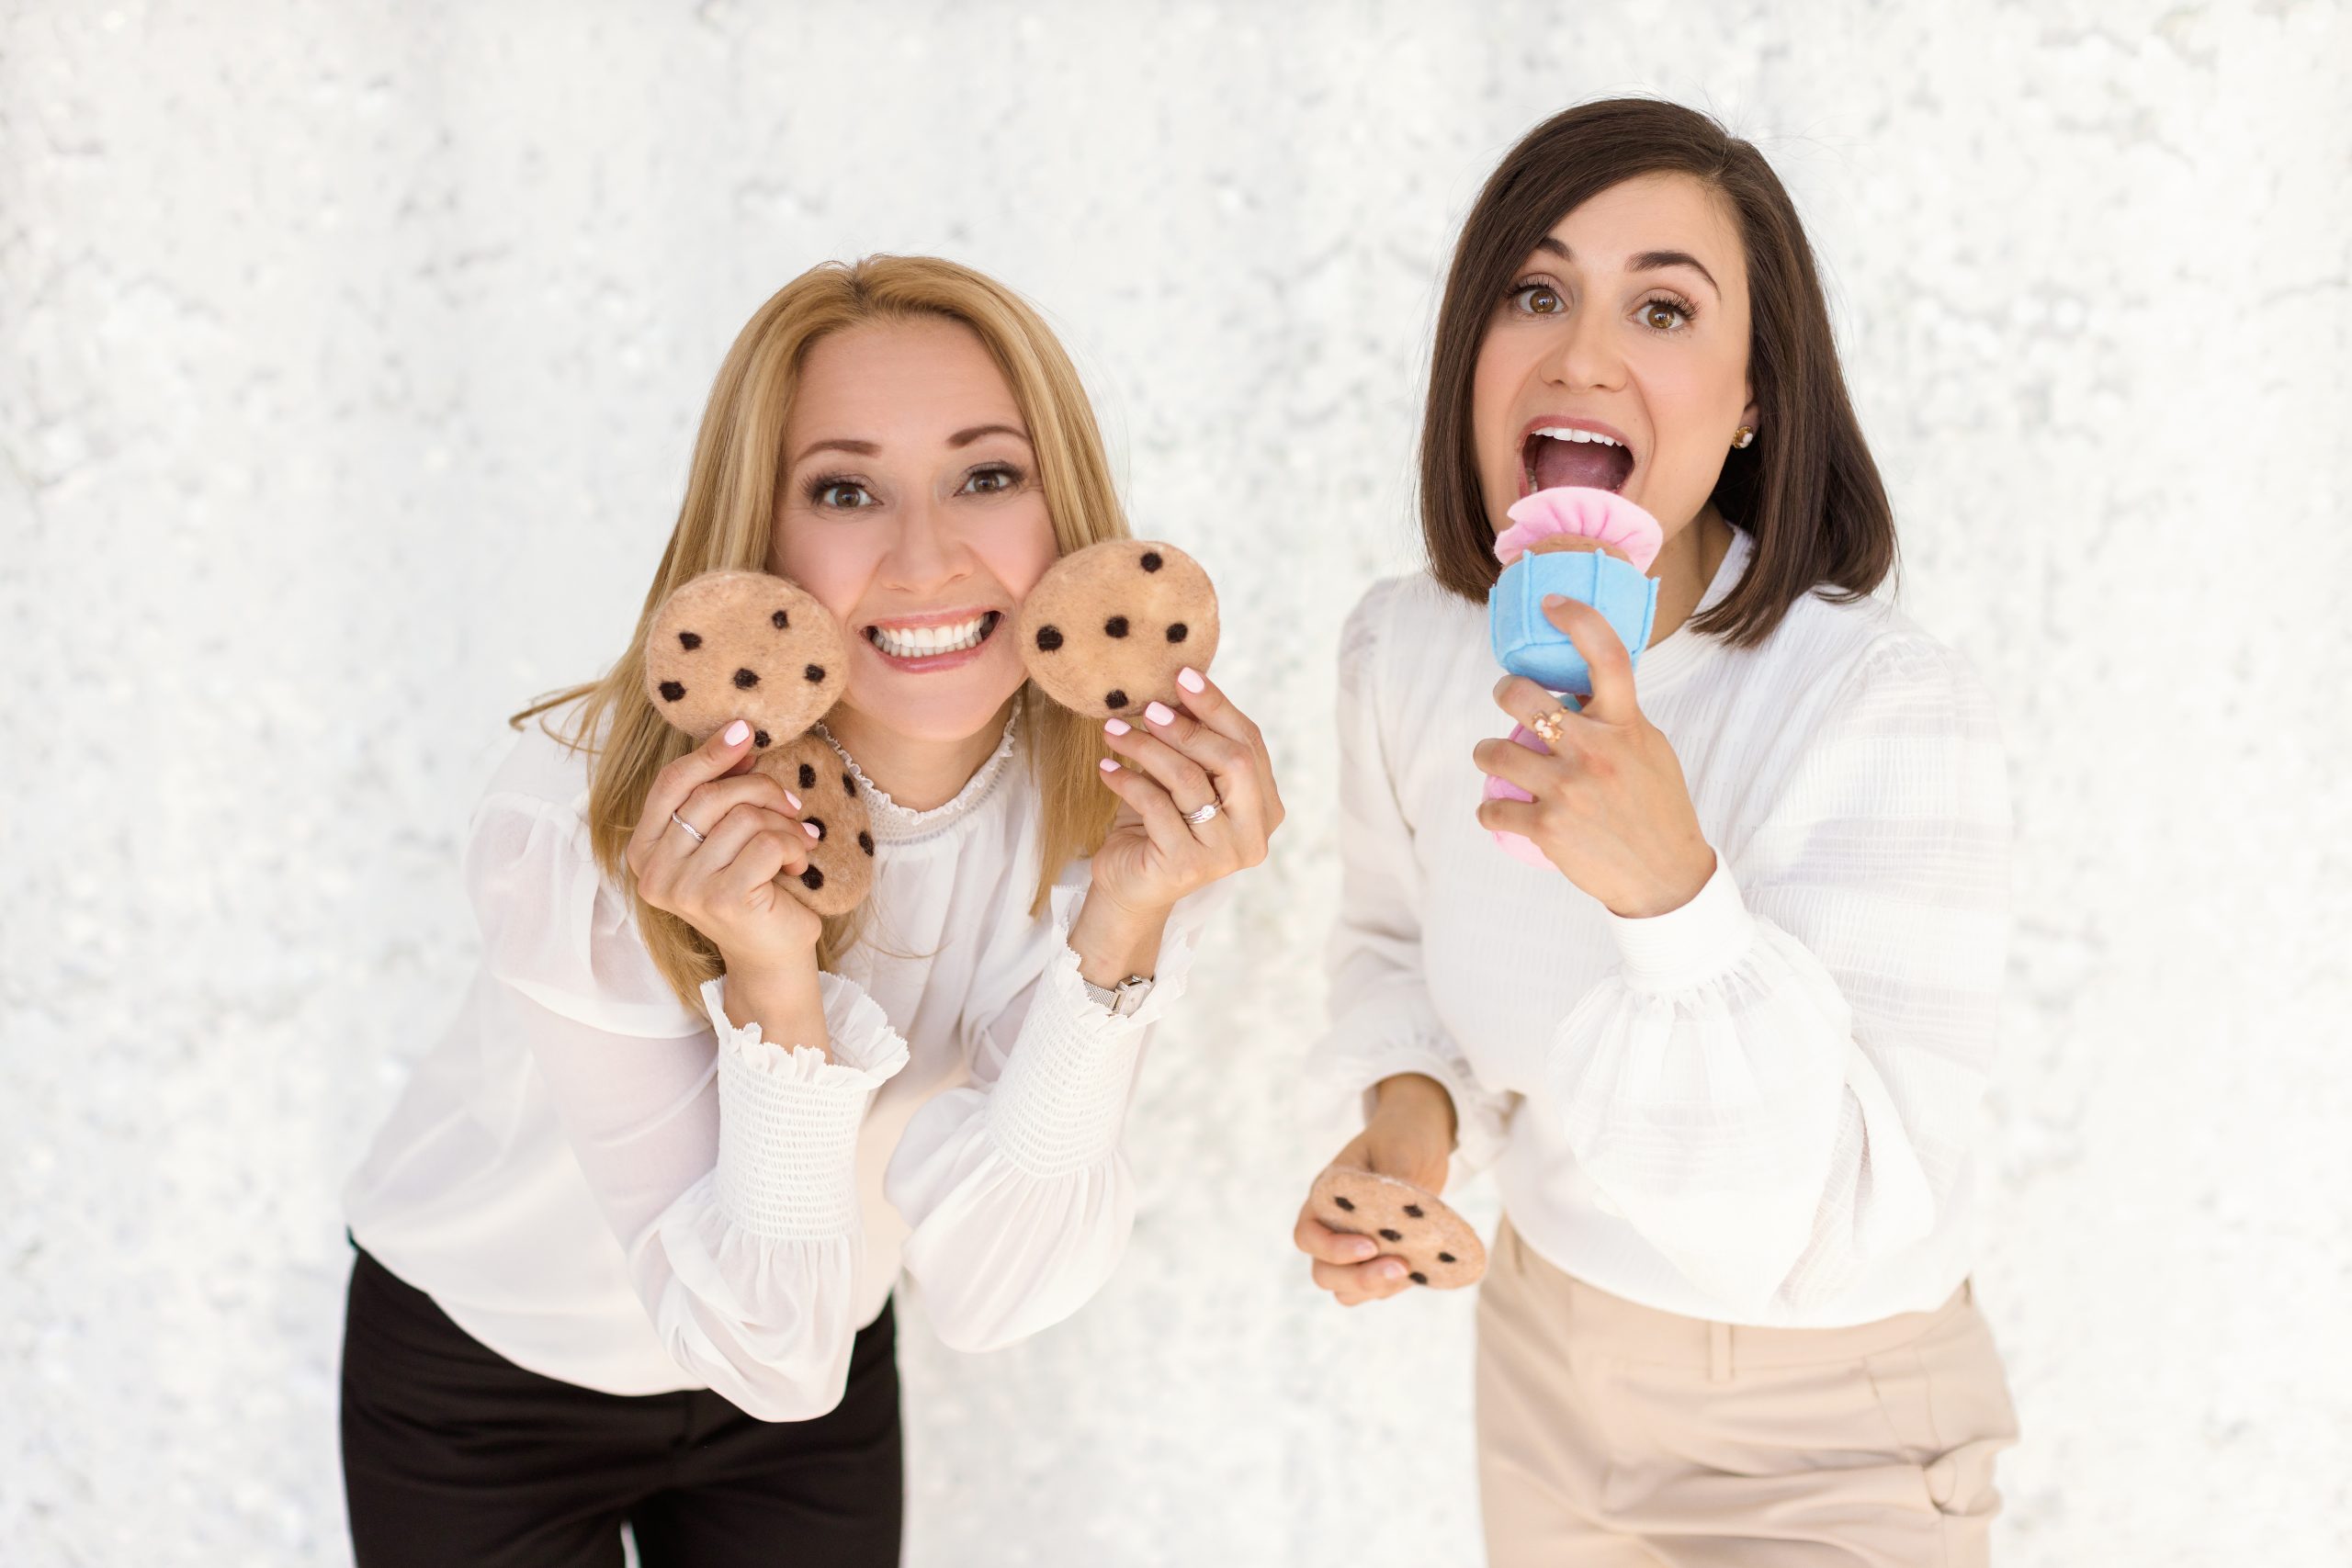 Natalie Bergman and Marcella Galizia playing with cookies and cupcake toys at Kids Reconnect